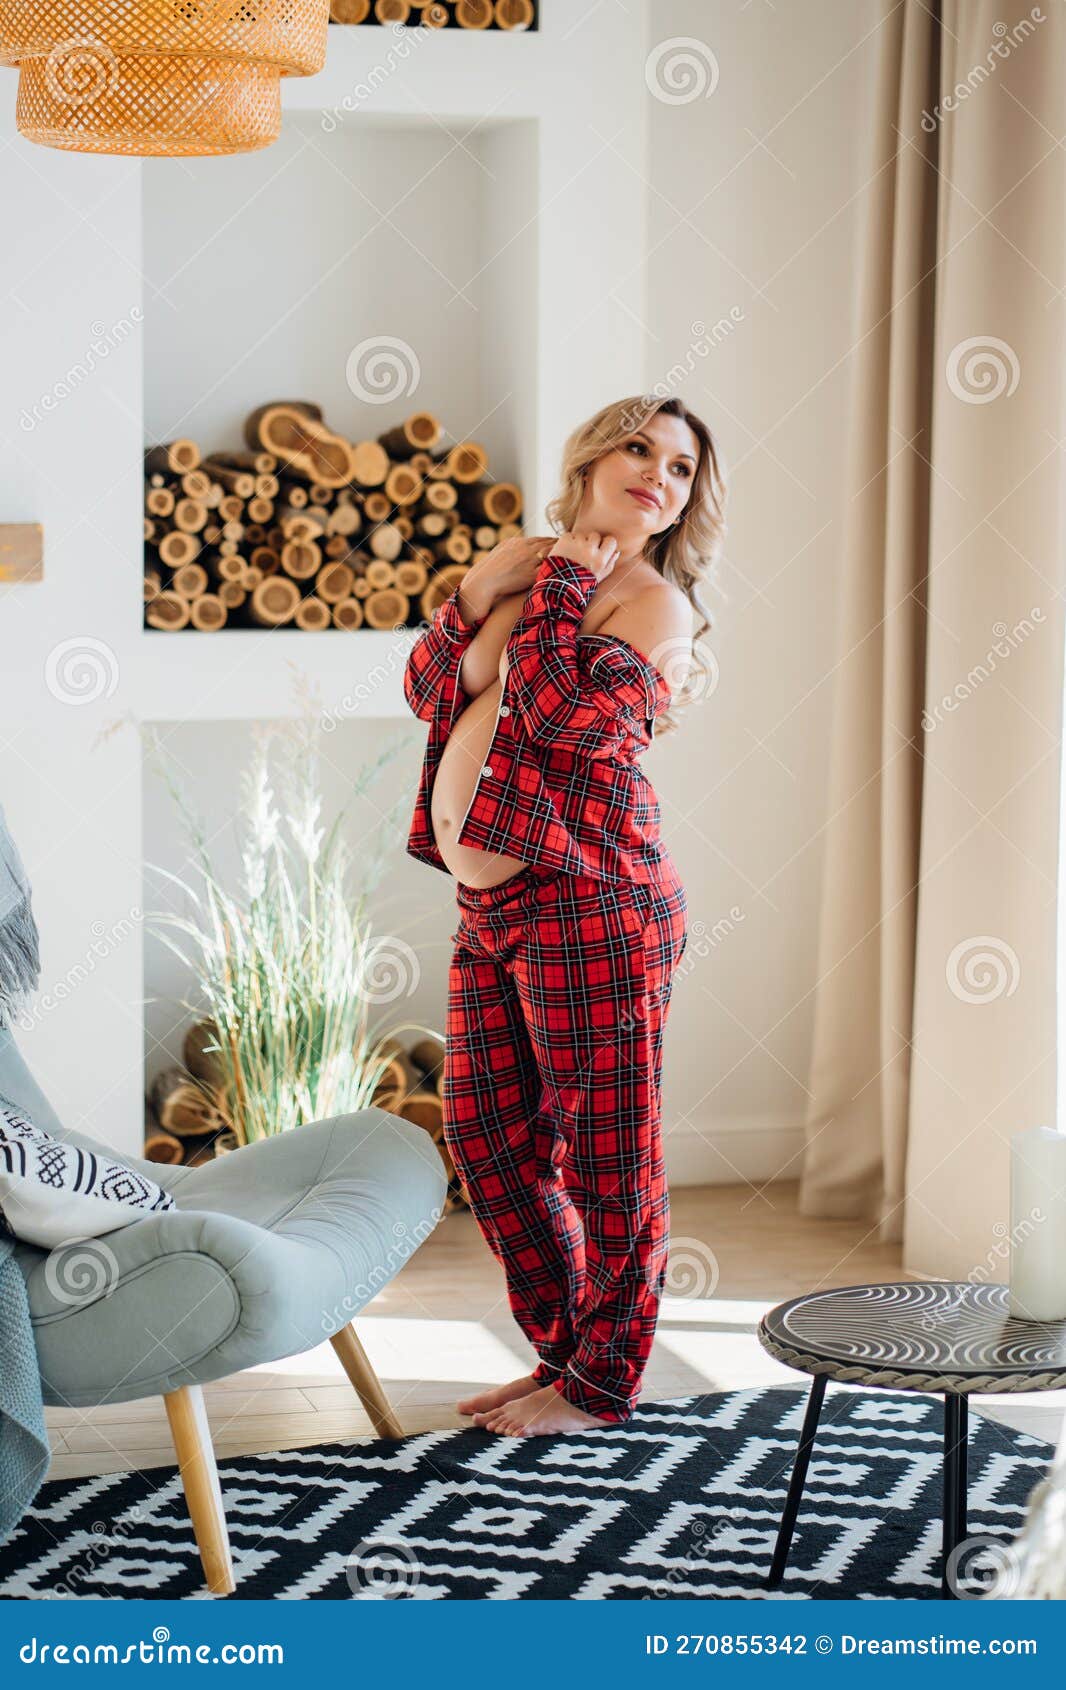 A Pregnant Woman Topless in Pajamas in a Home Interior. Stock